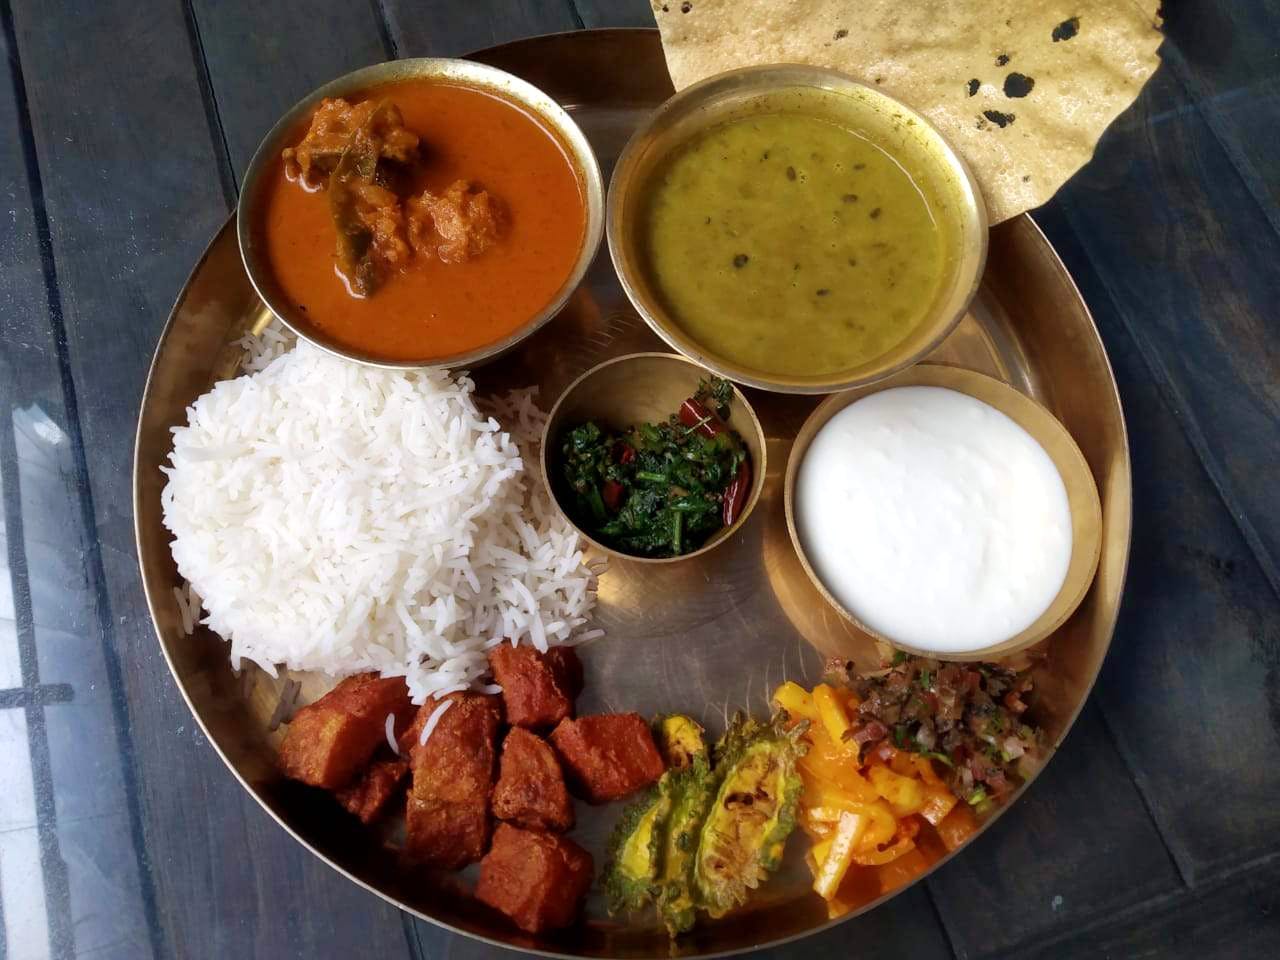 Dish,Food,Cuisine,Meal,Ingredient,Rice and curry,Lunch,Curry,Raita,Nepalese cuisine